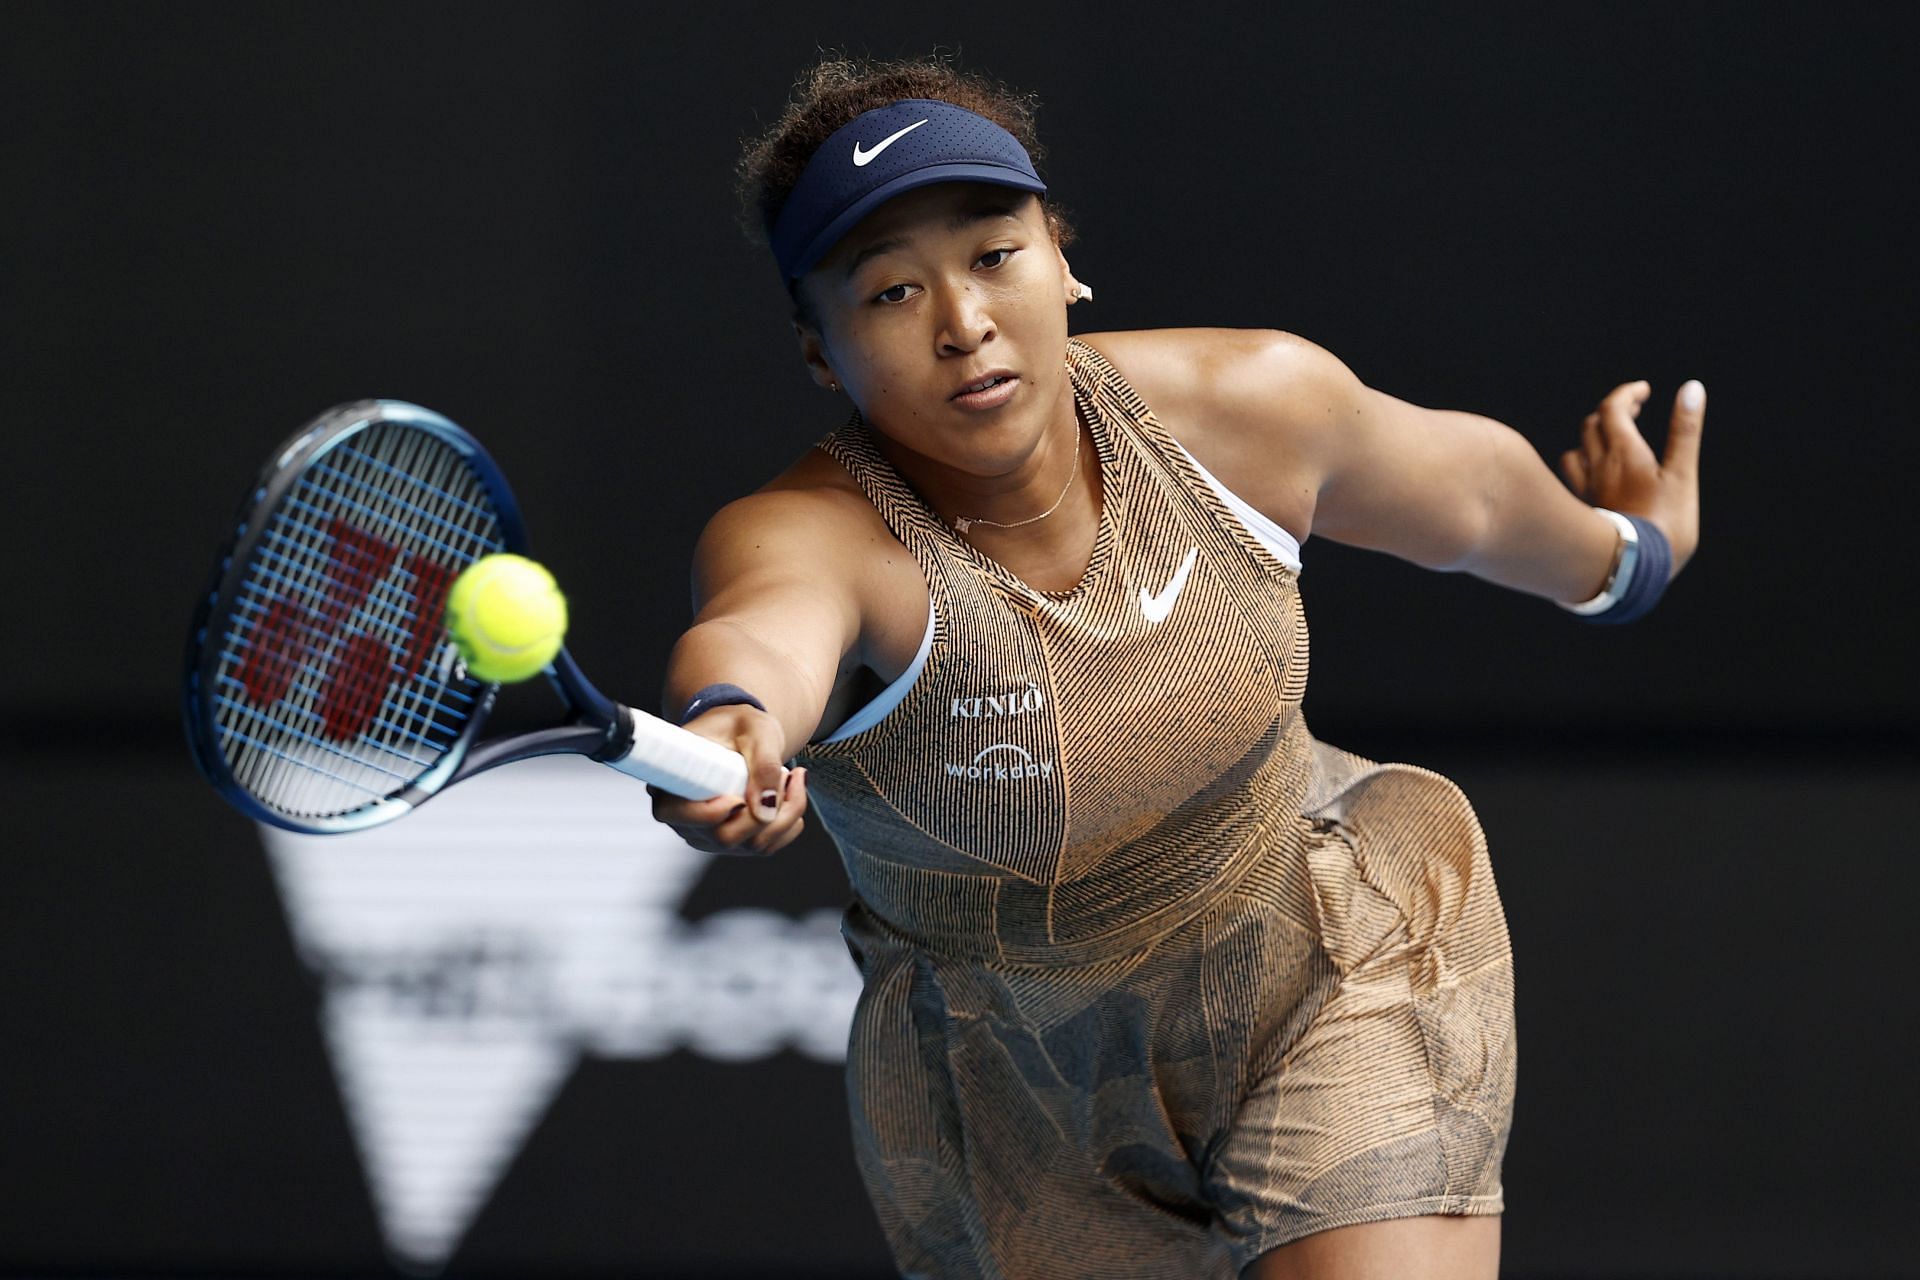 Naomi Osaka during her win over Alize Cornet at the 2022 Melbourne Summer Set